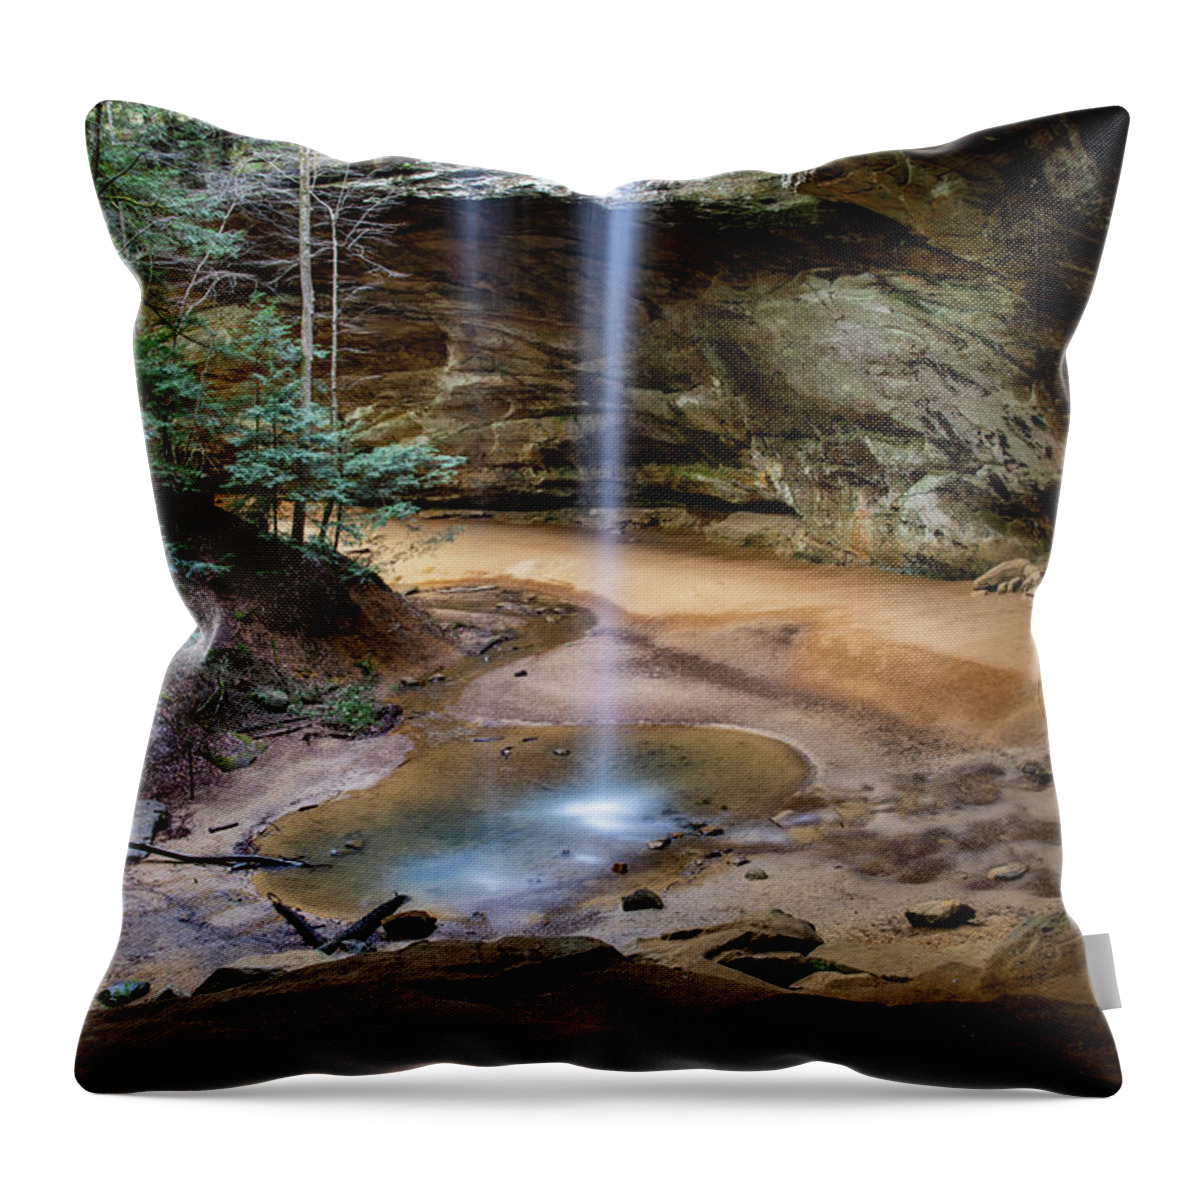 Ash Cave Vertical Throw Pillow featuring the photograph Ash Cave Waterfall Long Exposure by Dan Sproul